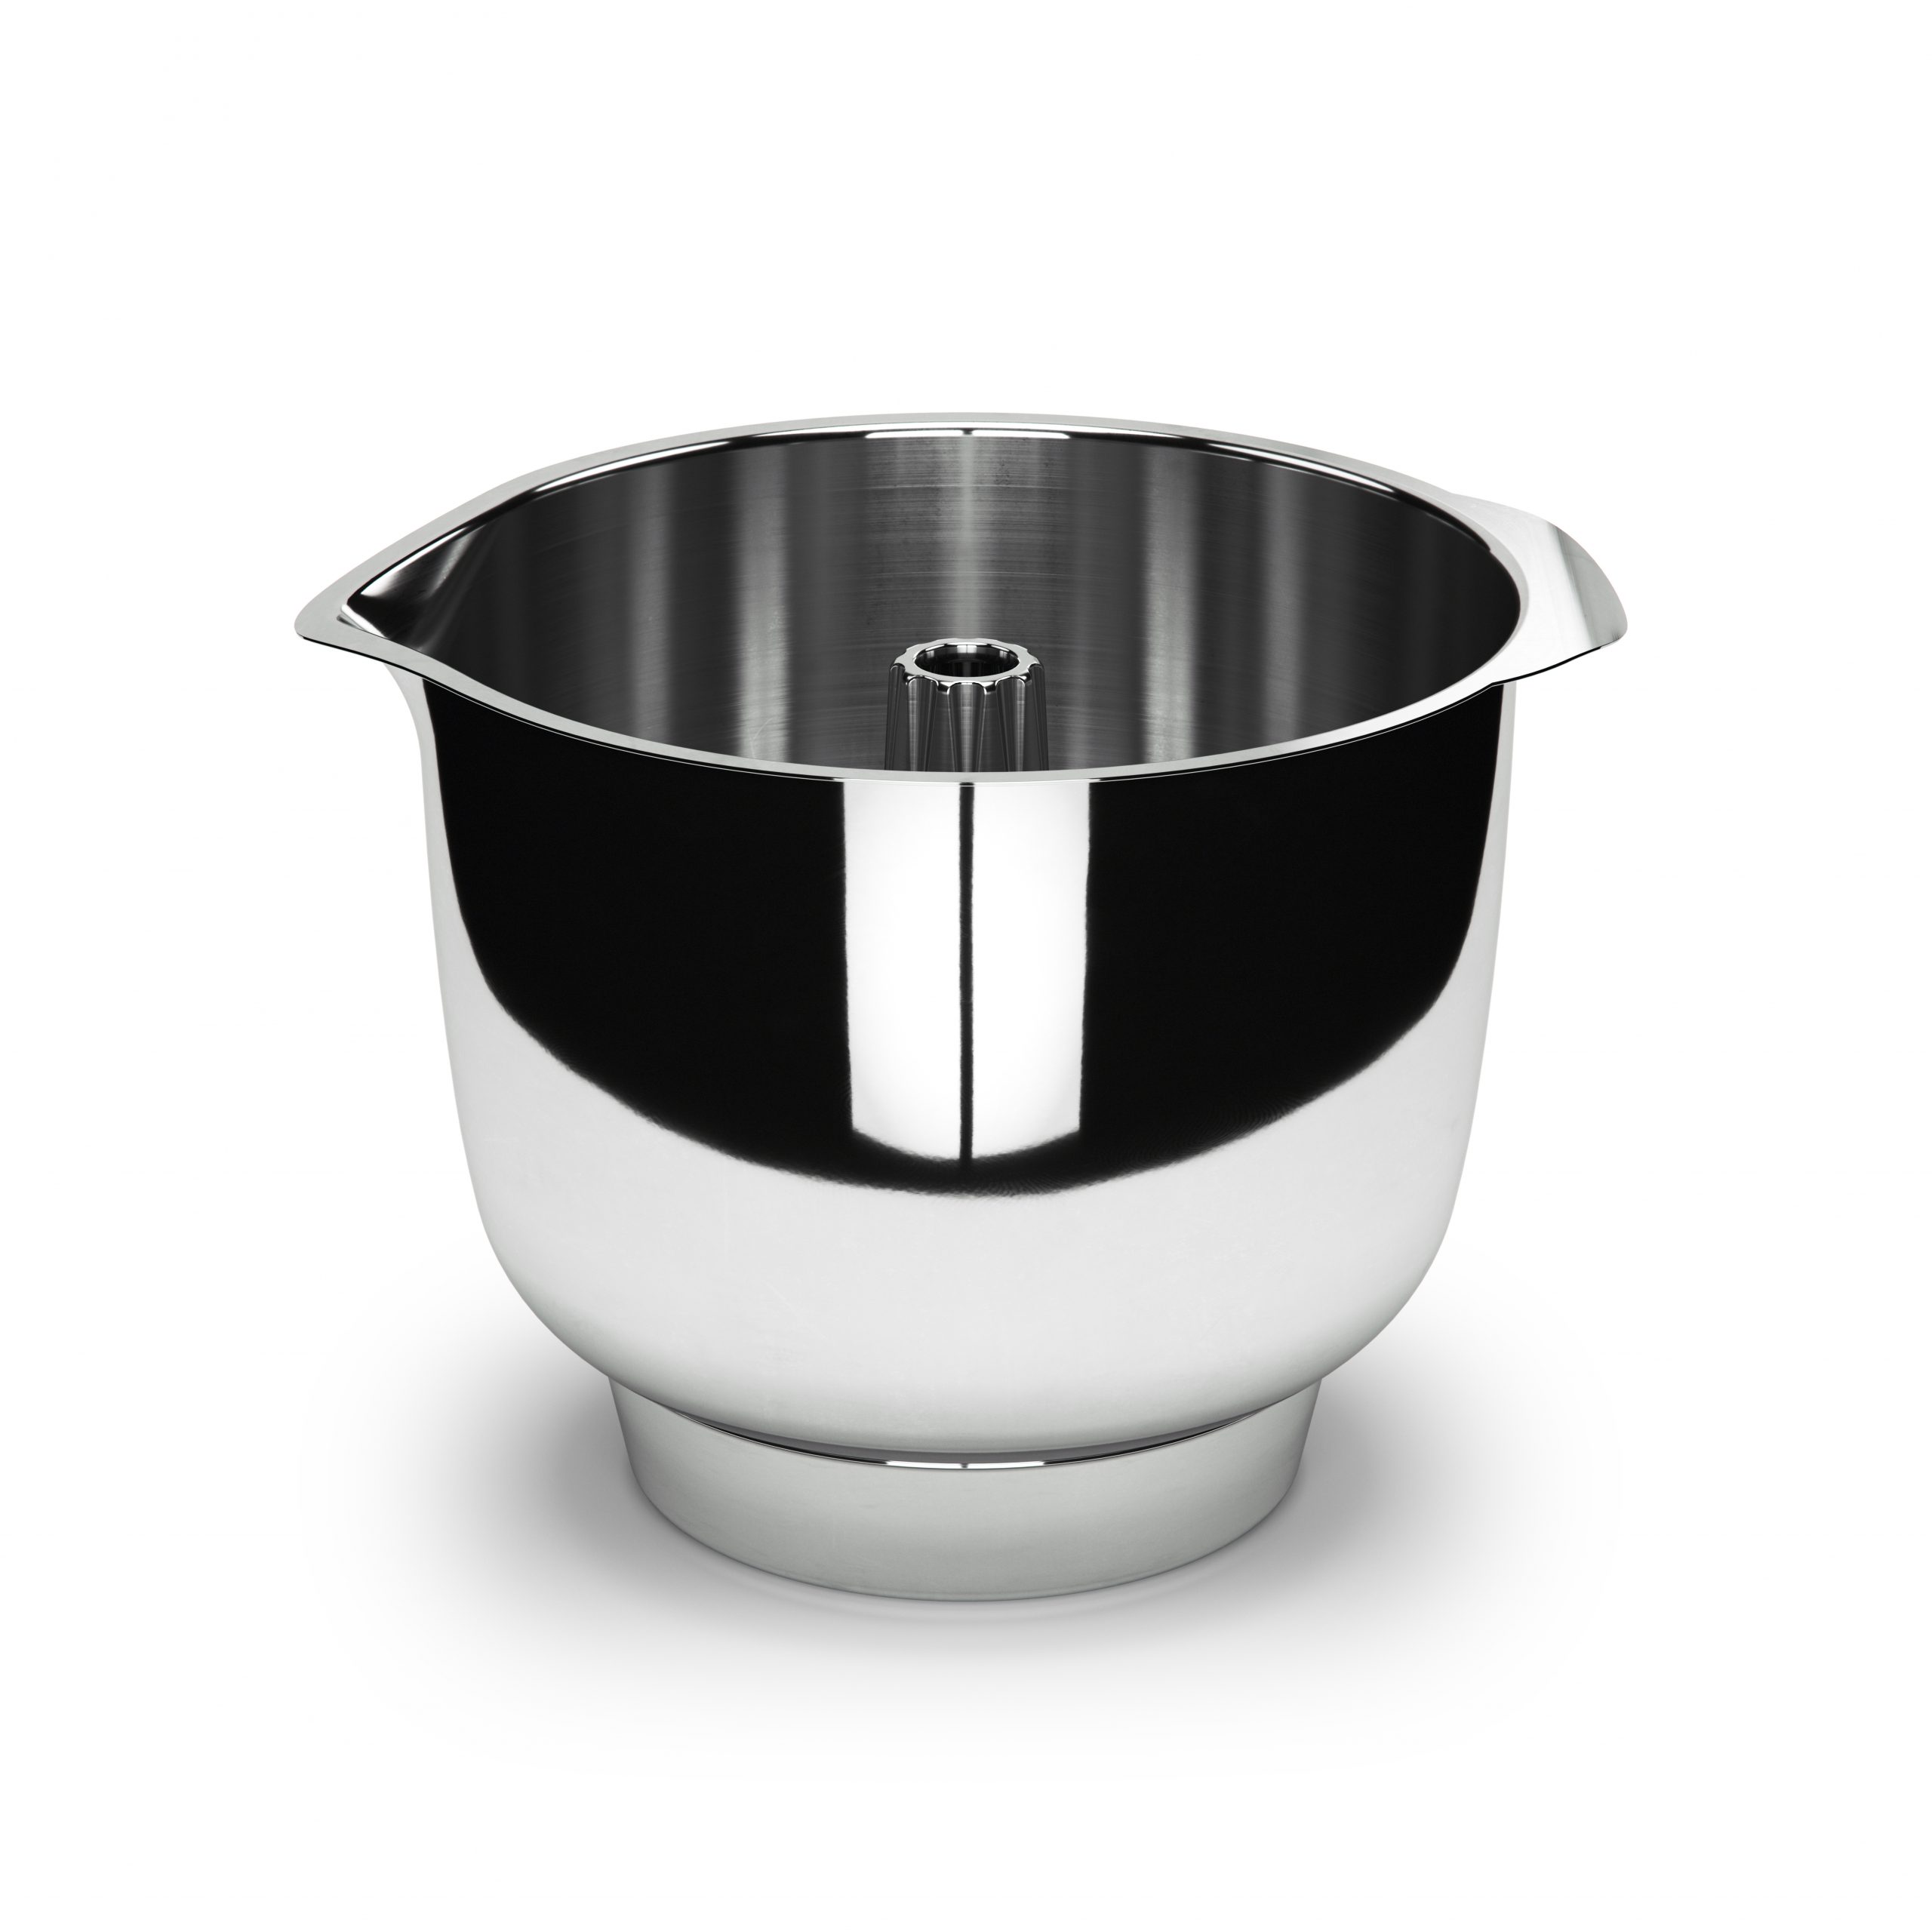 5-Quart Stainless Steel Bowl + Stainless Steel Pastry Beater